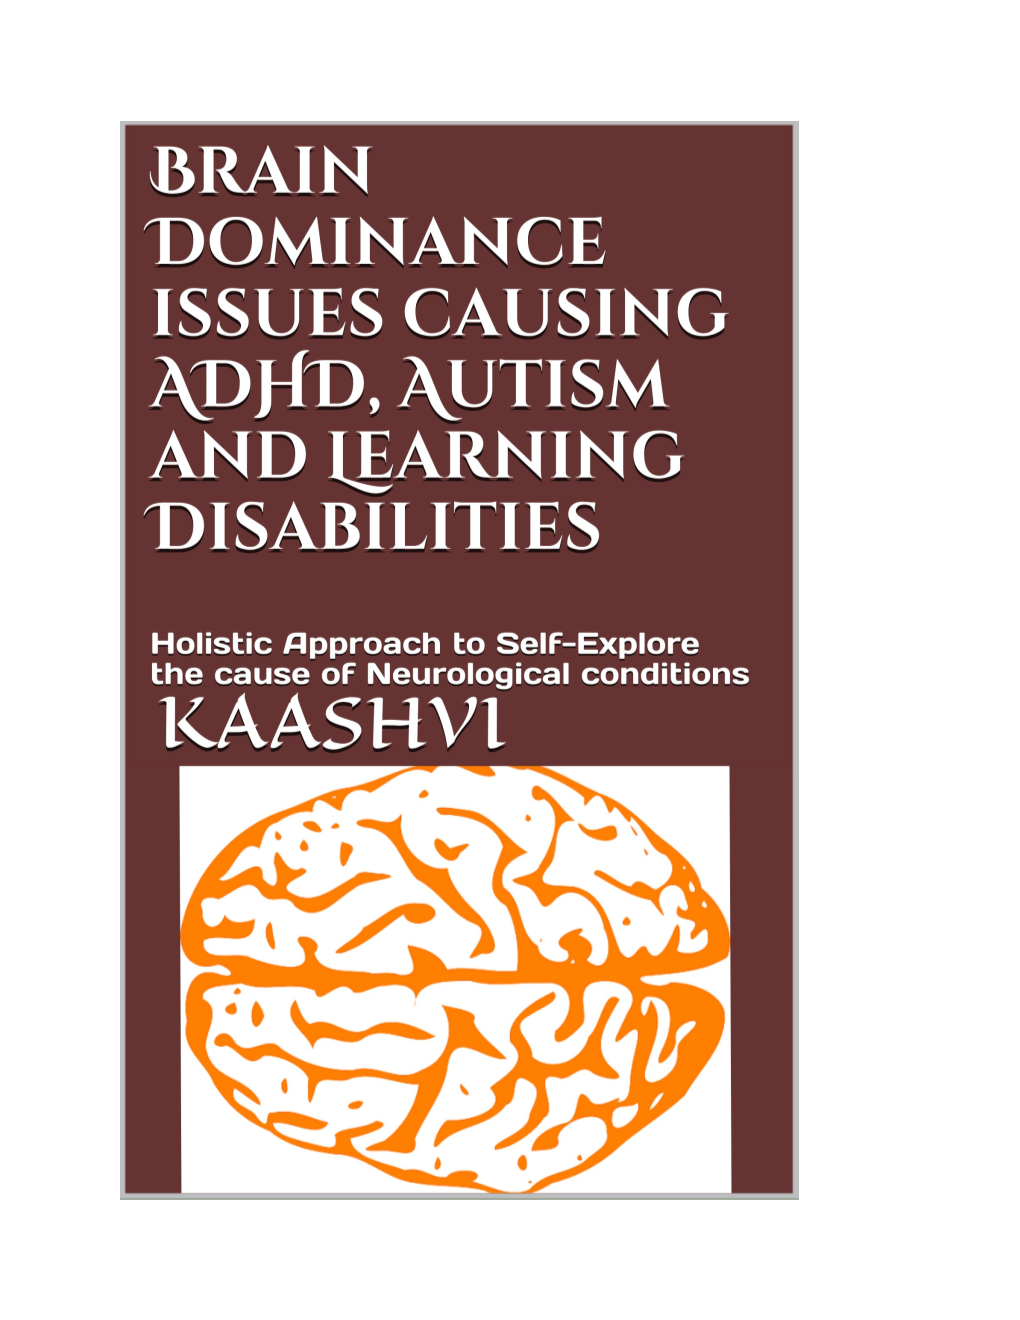 Brain Dominance Issues Causing ADHD, Autism and Learning Disabilities